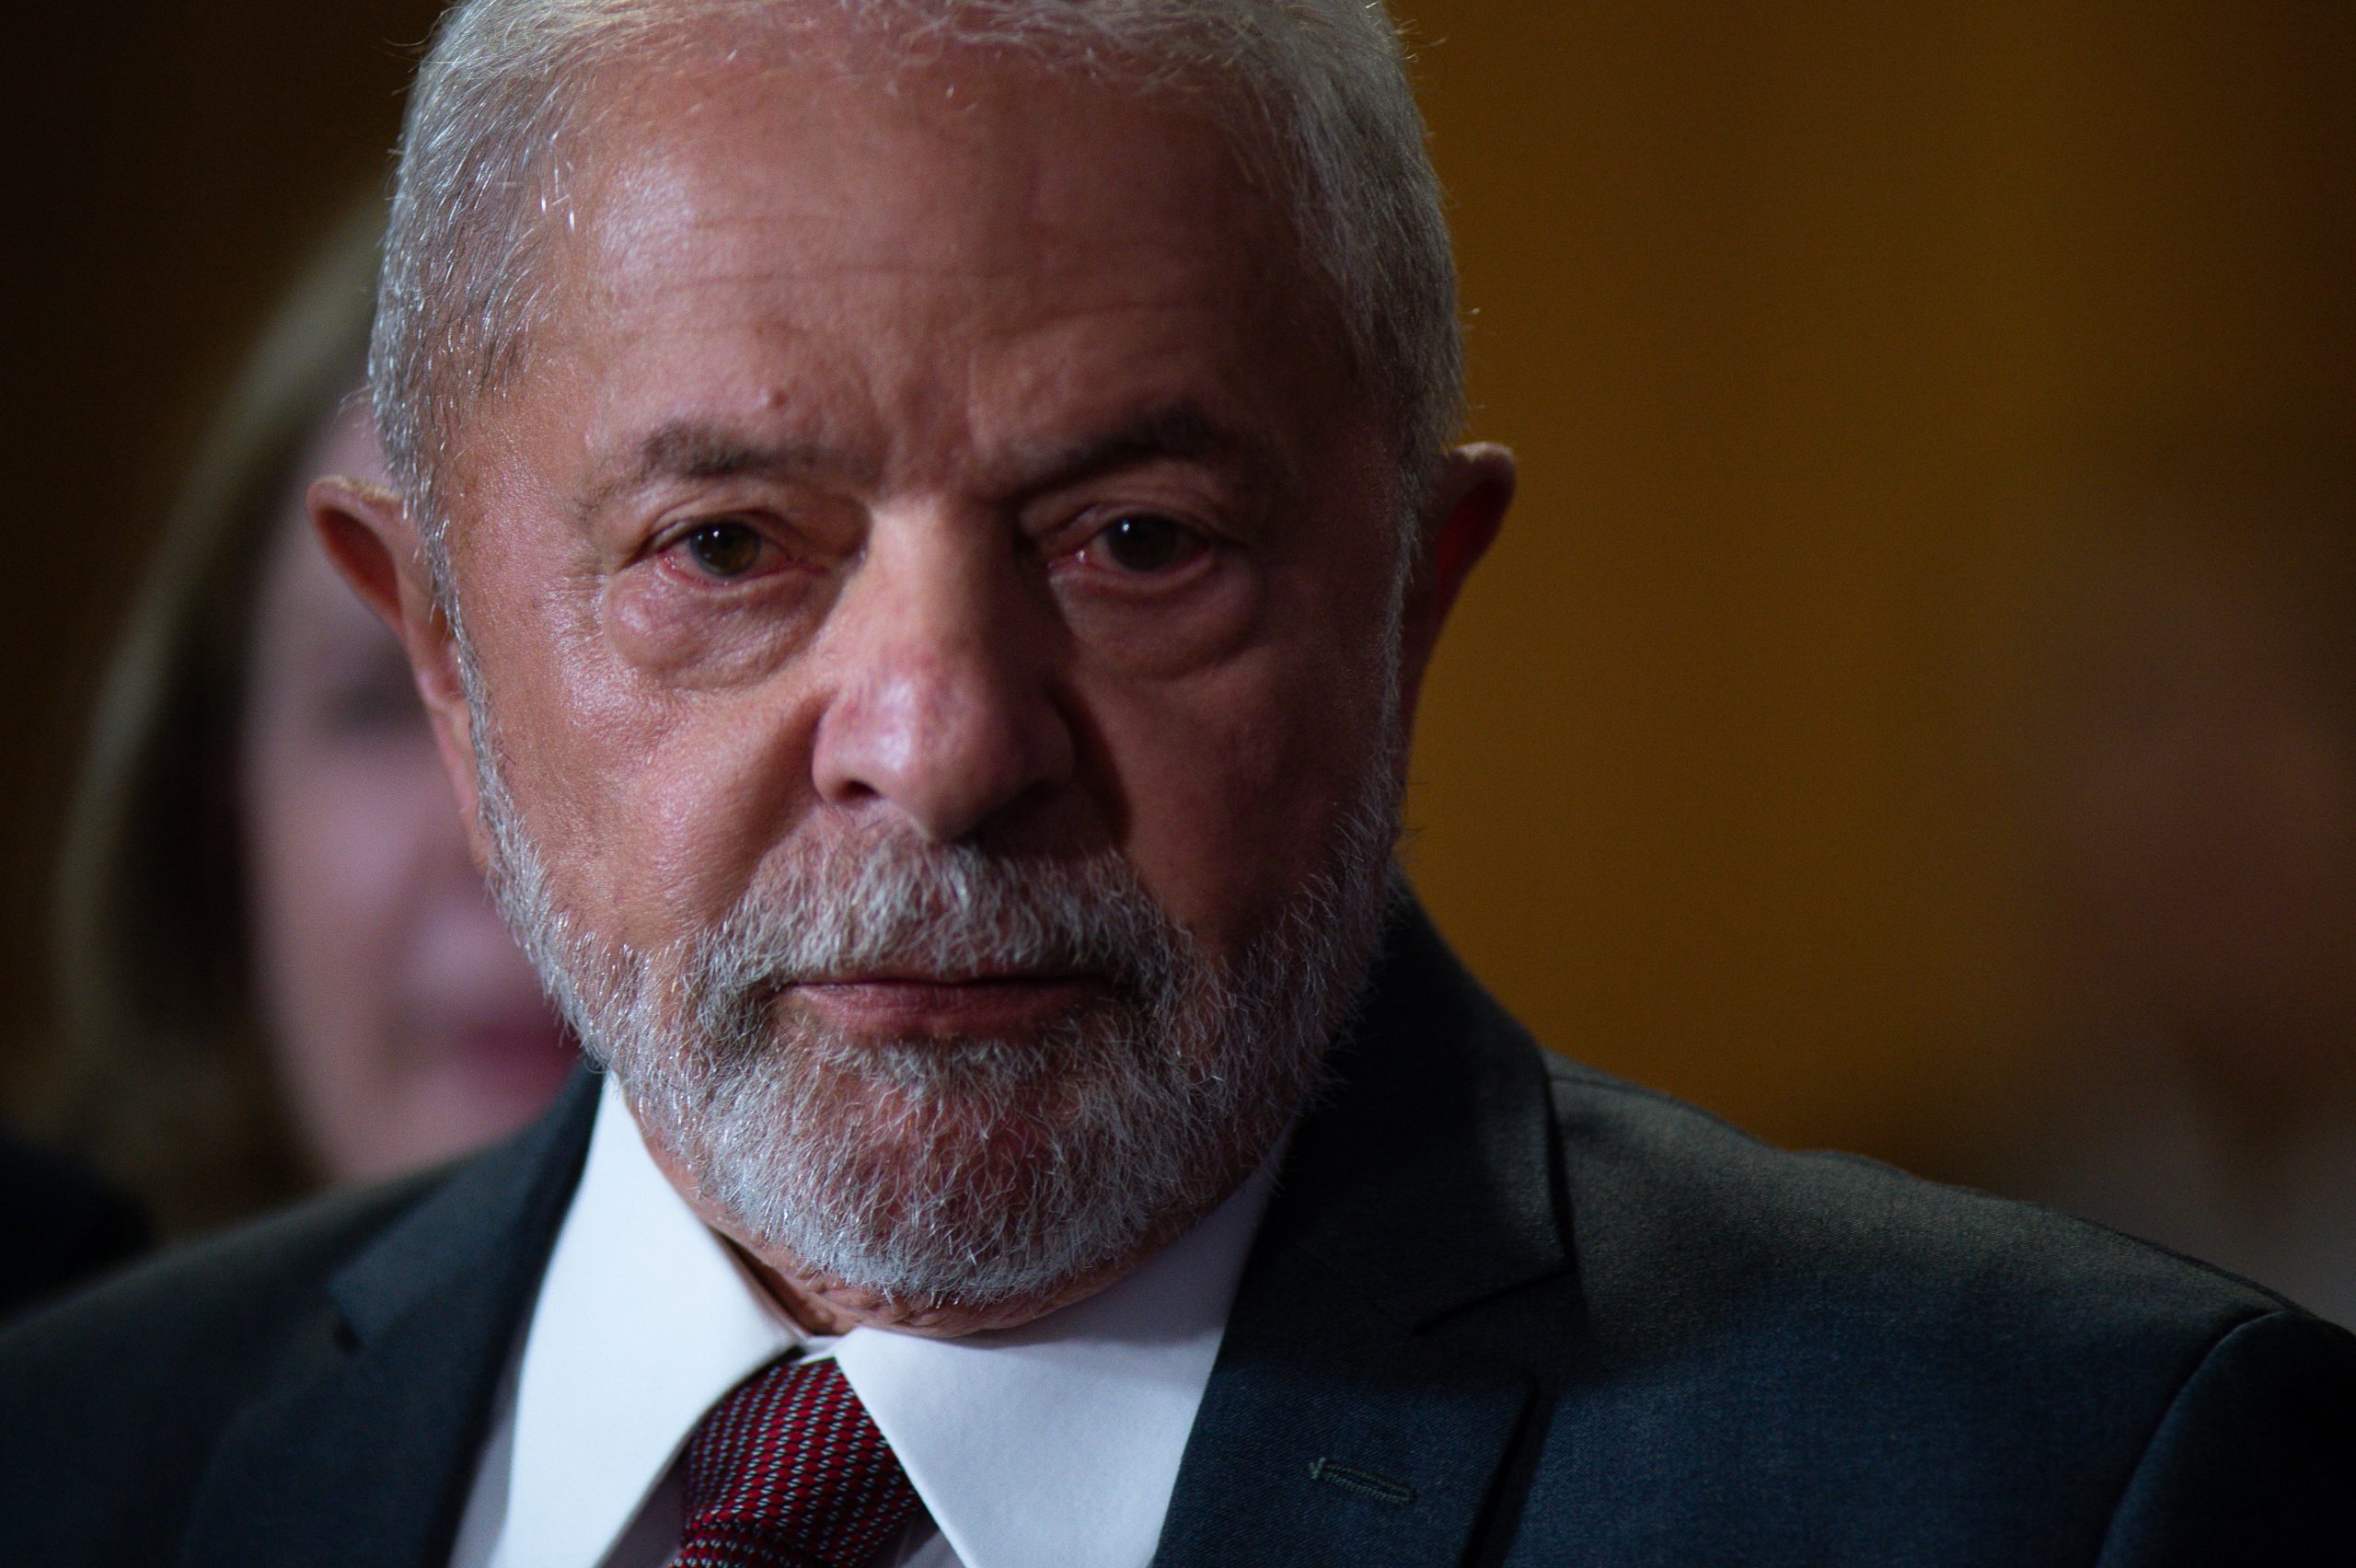 For Lula, Fighting Against Fascism and For Economic Justice is Nothing New